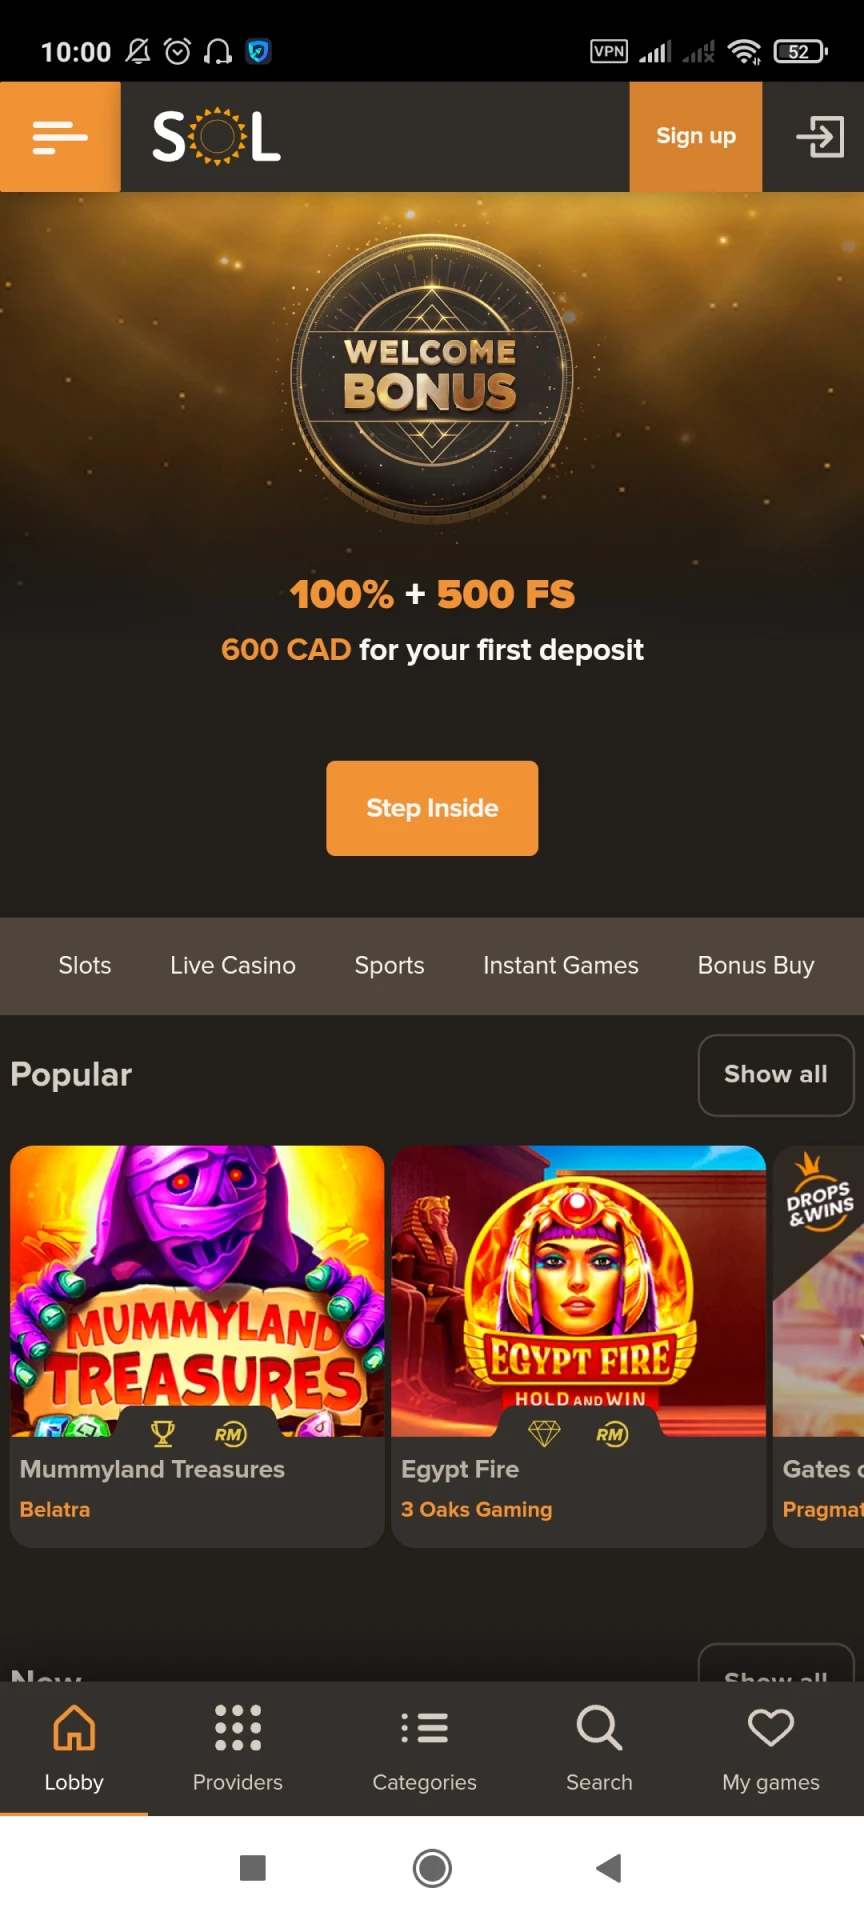 Visit the main page to install the Sol Casino app on Android.